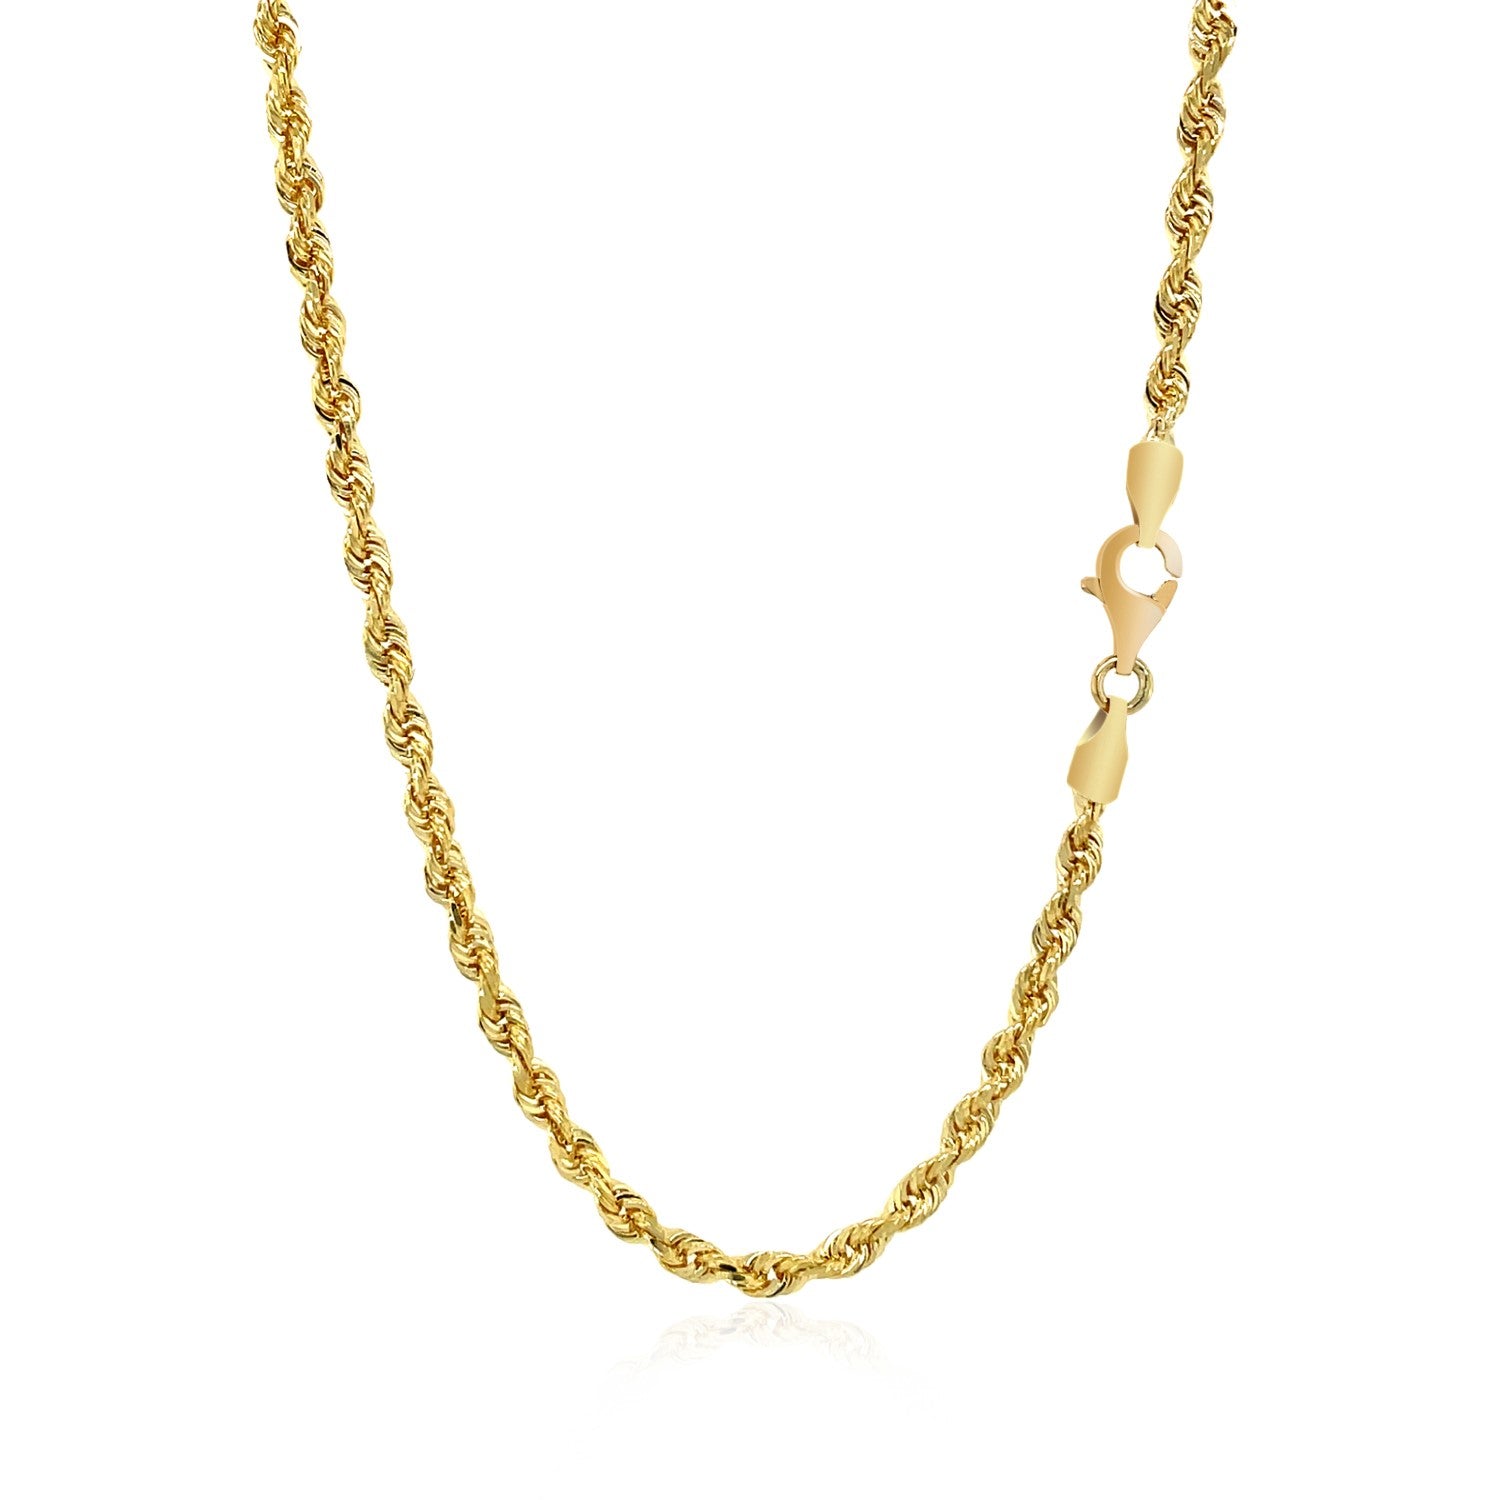 3 0Mm 14K Yellow Gold Solid Diamond Cut Rope Chain 58975-4